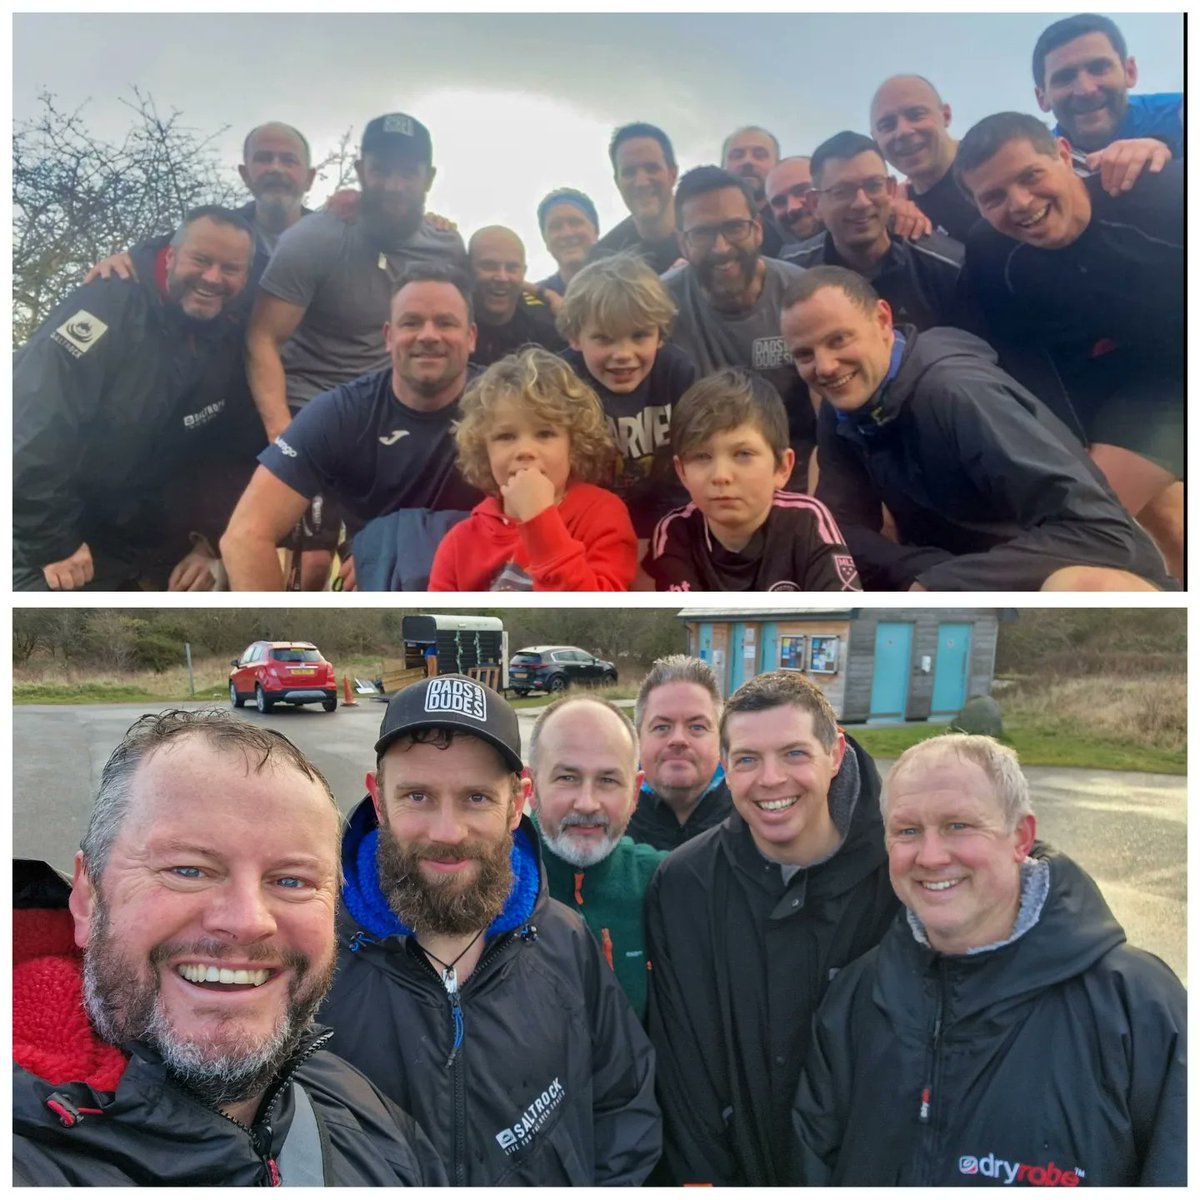 A wee dip this morning with some of the #dadsanddudes guys. Good to ease off the legs from the ride yesterday. Training for #allroadsleadtorome for @doddie_aid in support of @MNDoddie5 10 days to go! justgiving.com/page/richard-e… Team #theinternationalroamingbundle